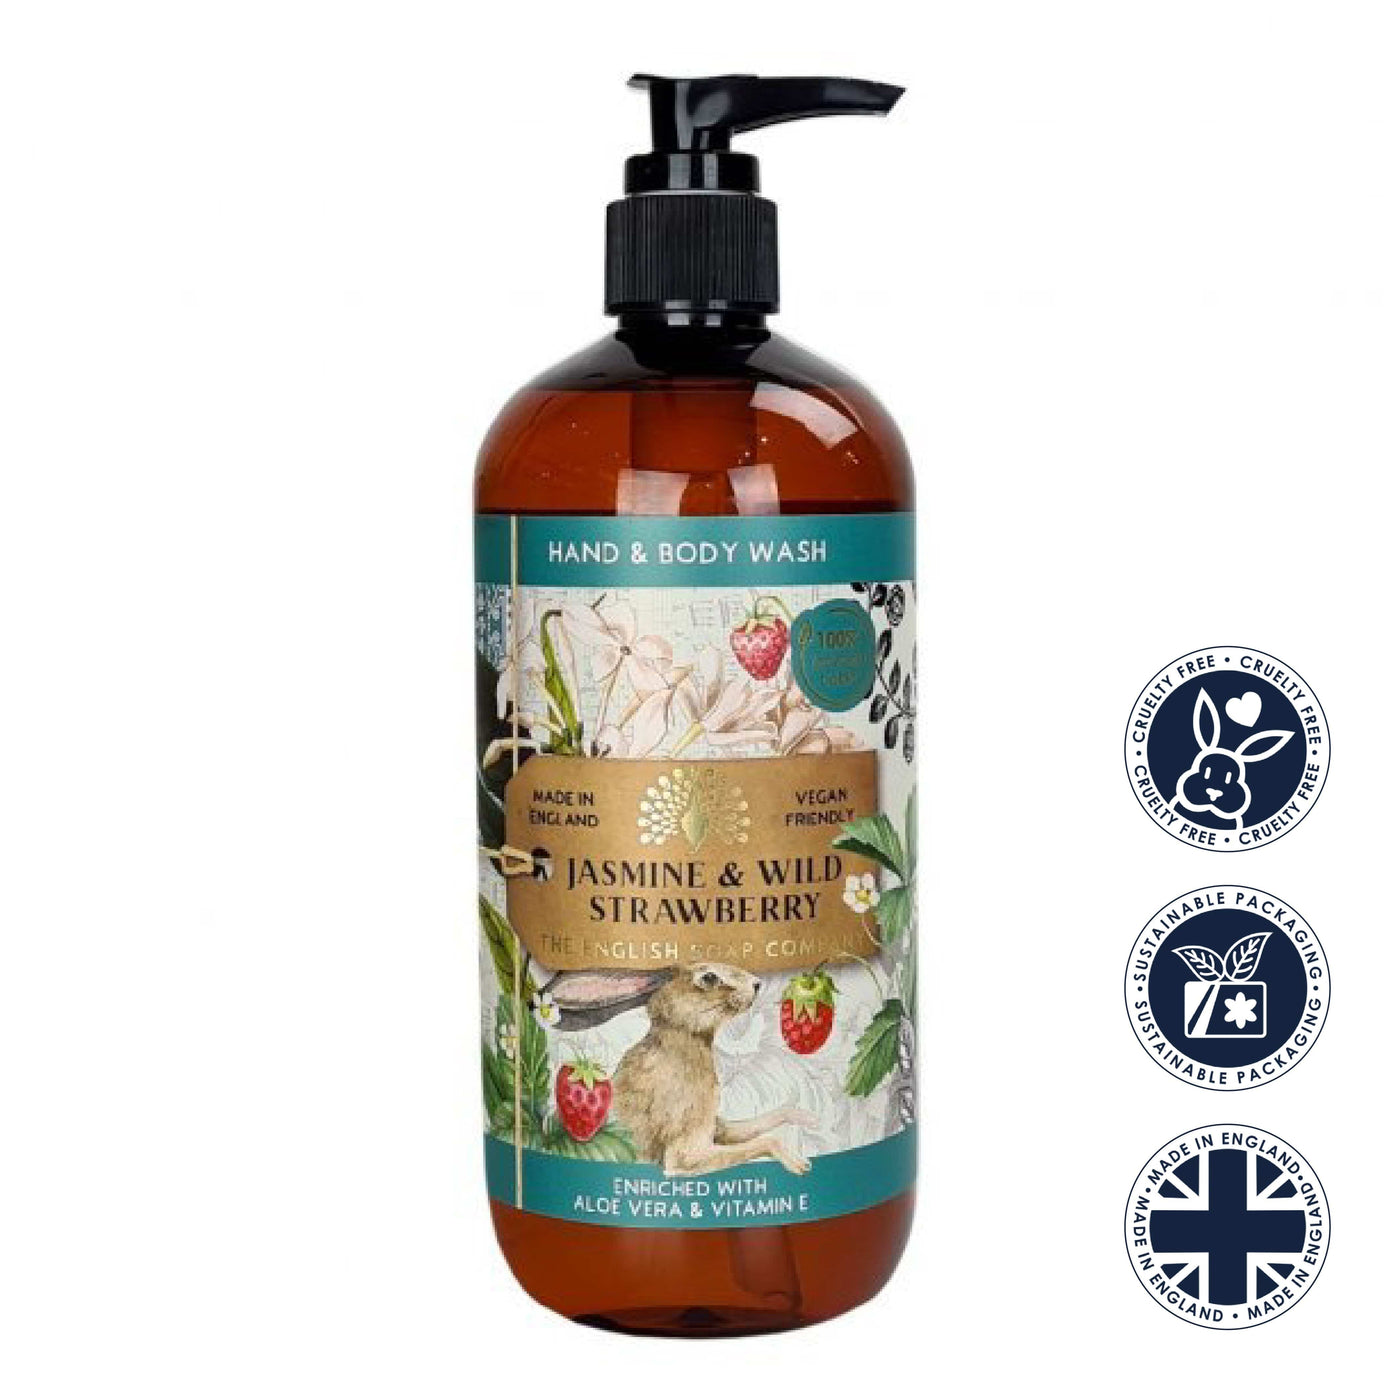 Jasmine and Wild Strawberry Hand & Body Wash - Anniversary Collection from our Liquid Hand & Body Soap collection by The English Soap Company